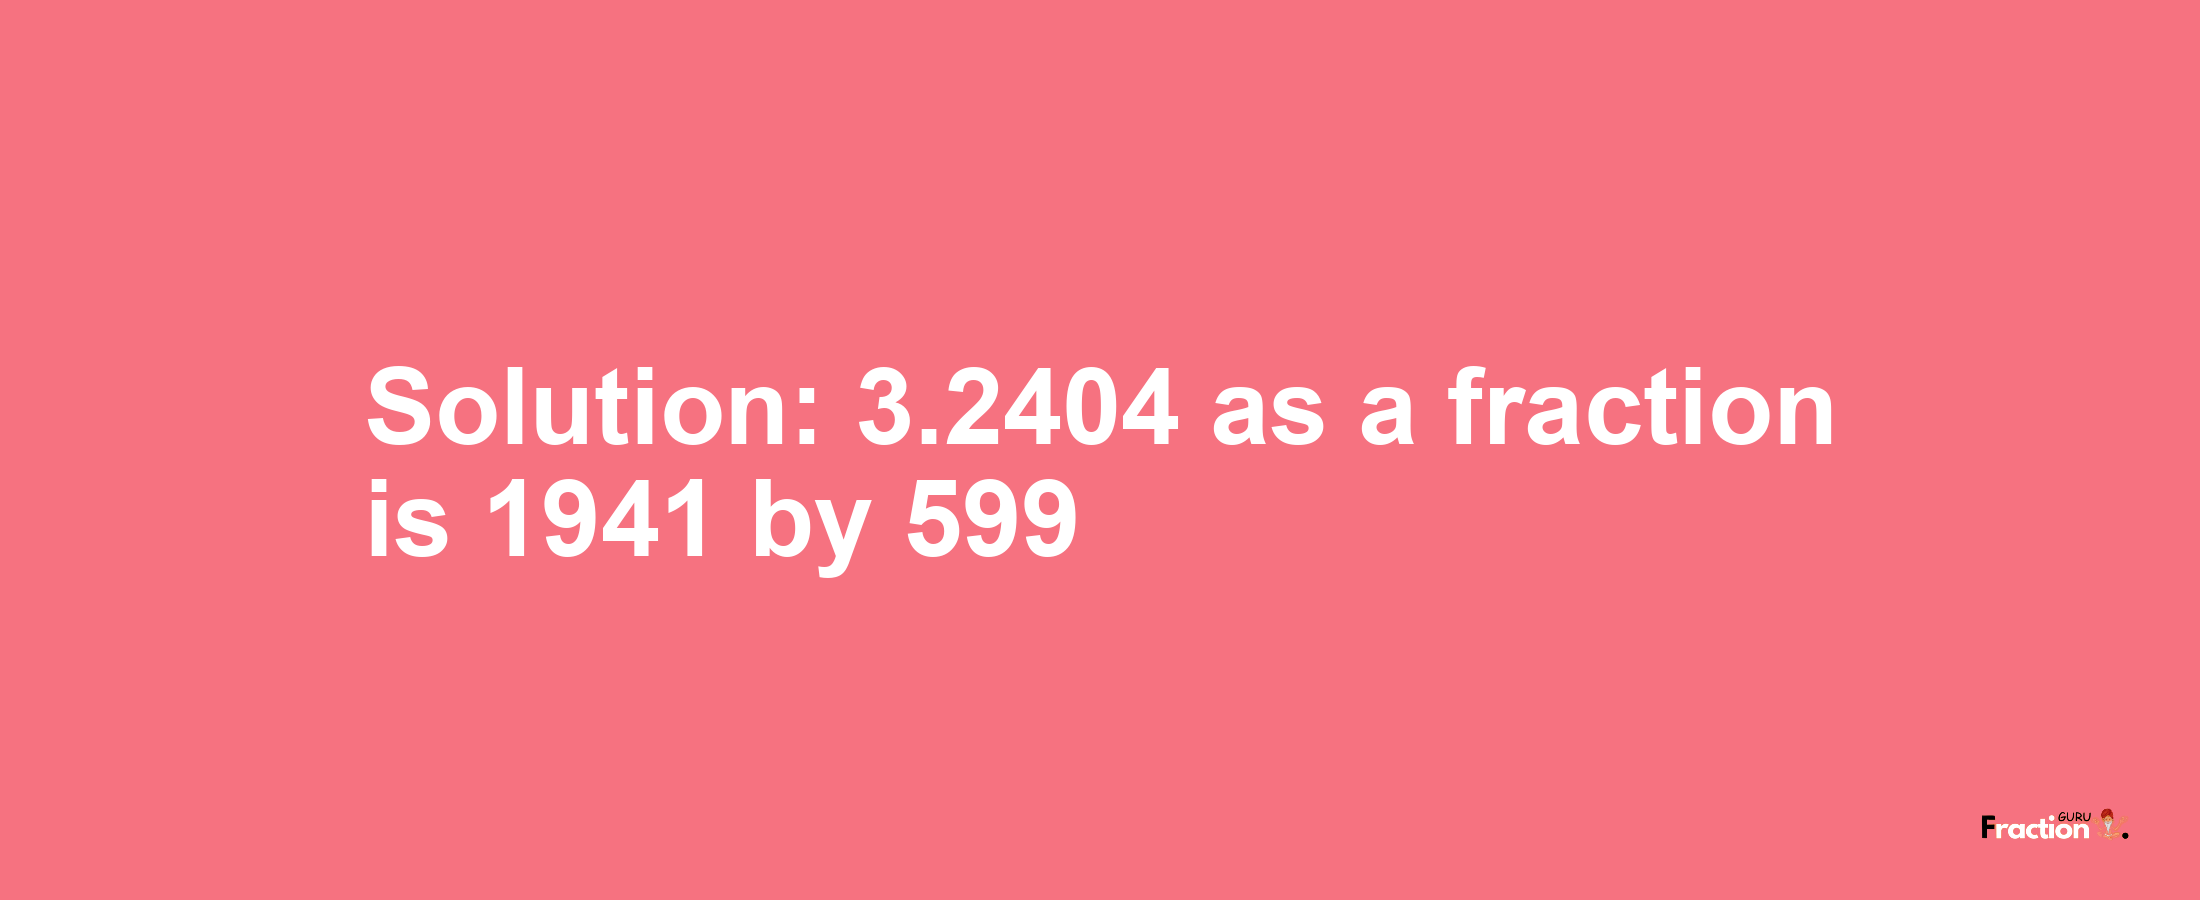 Solution:3.2404 as a fraction is 1941/599